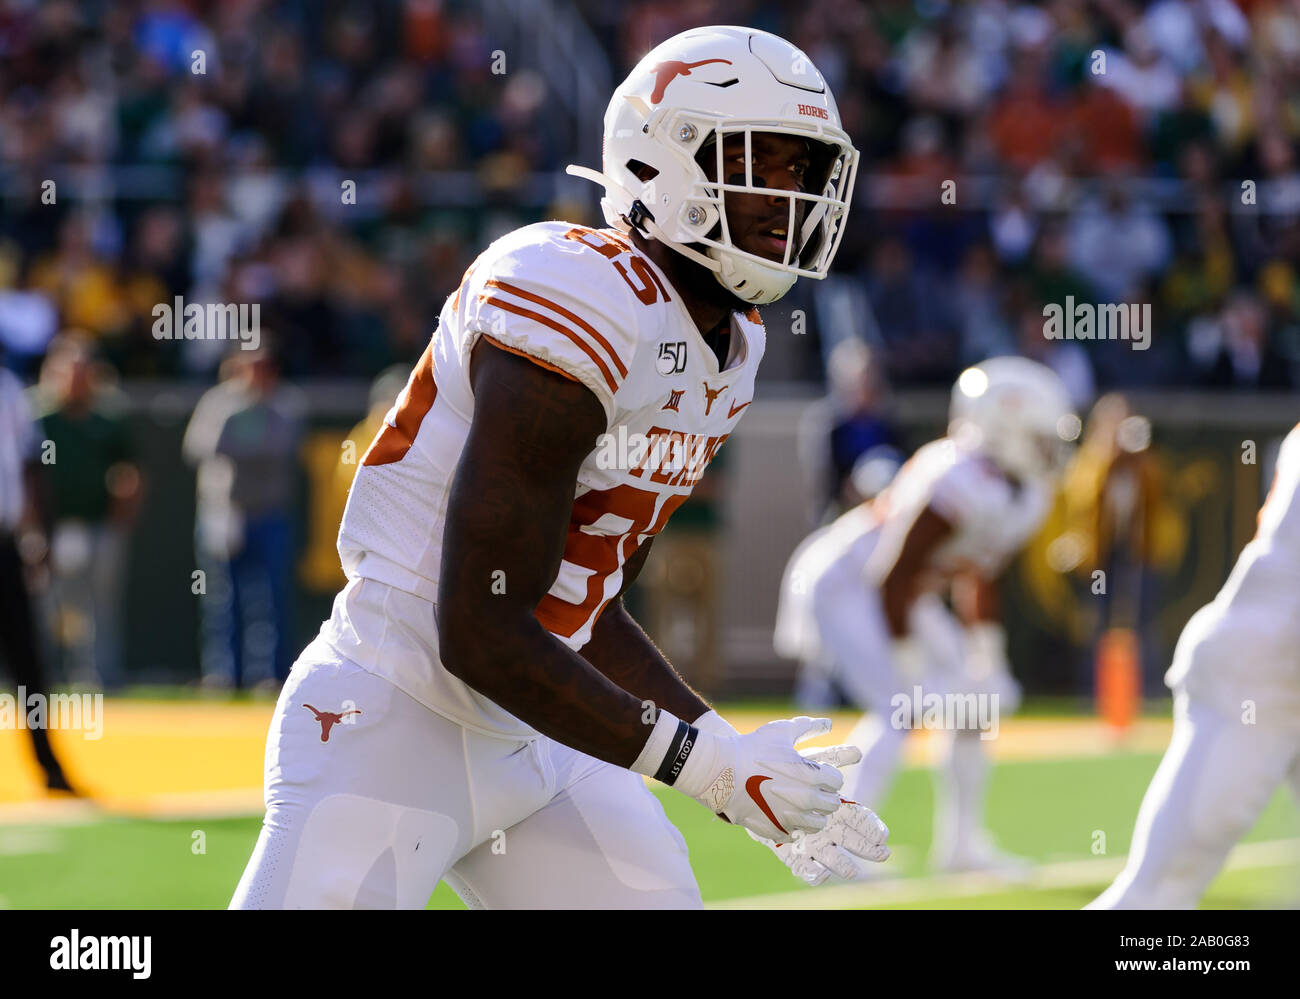 Waco, Texas, USA. 23rd Nov, 2019. Texas Longhorns wide receiver Malcolm Epps (85) lines up for a play during the 1st half of the NCAA Football game between Texas Longhorns and the Baylor Bears at McLane Stadium in Waco, Texas. Matthew Lynch/CSM/Alamy Live News Stock Photo